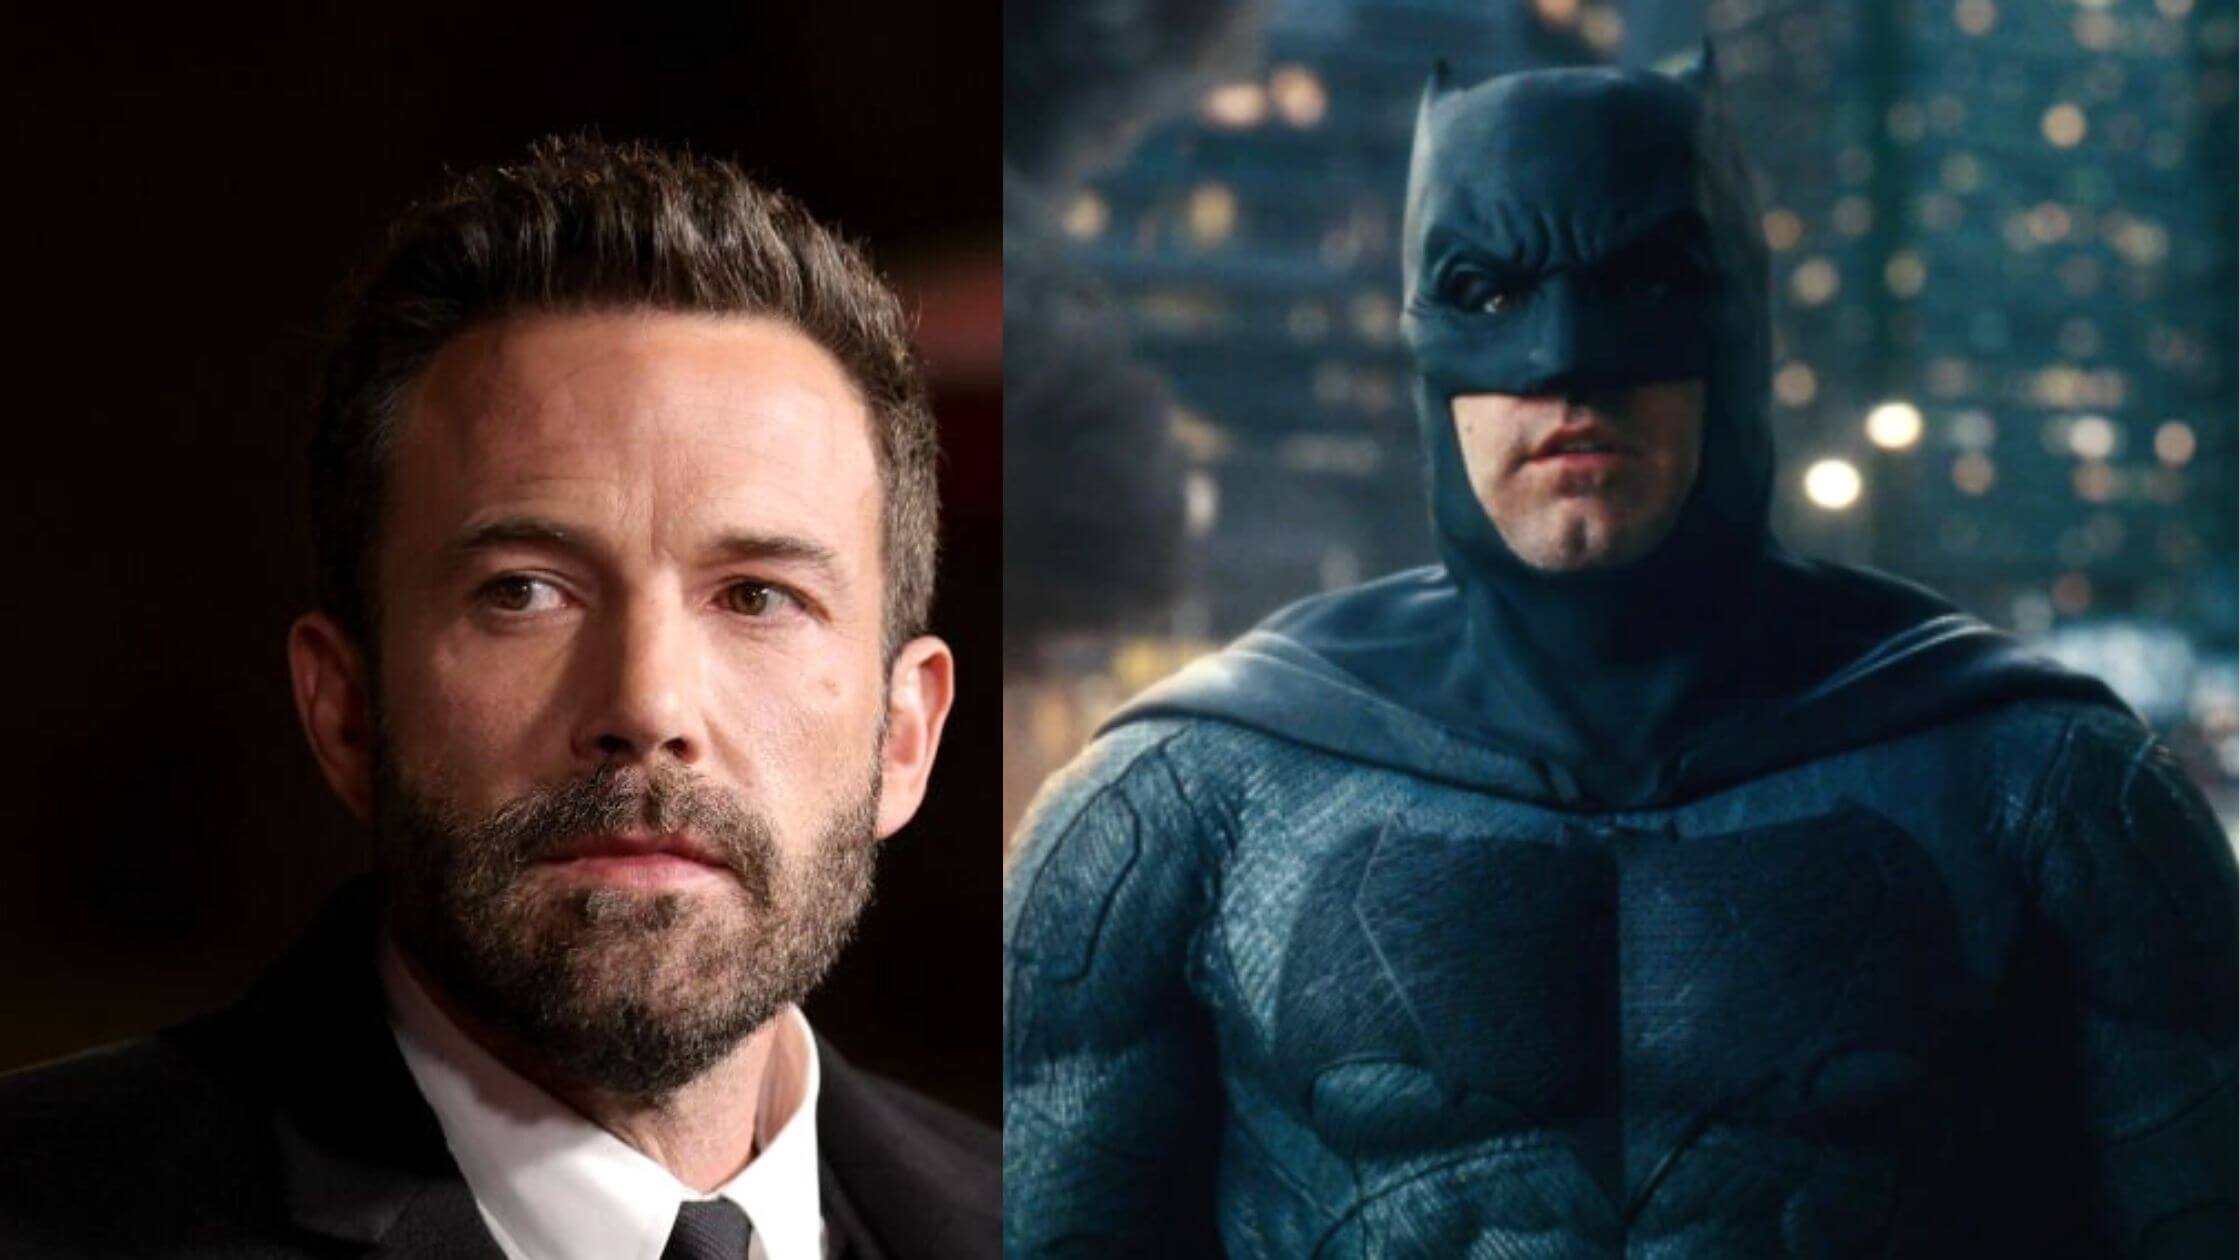 MakeTheBatFleck-2-Years-And-Still-The-Fans-Are-Urging-DC-To-Give-Them-A-Batman-Movie-Starring-Ben-Affleck-1